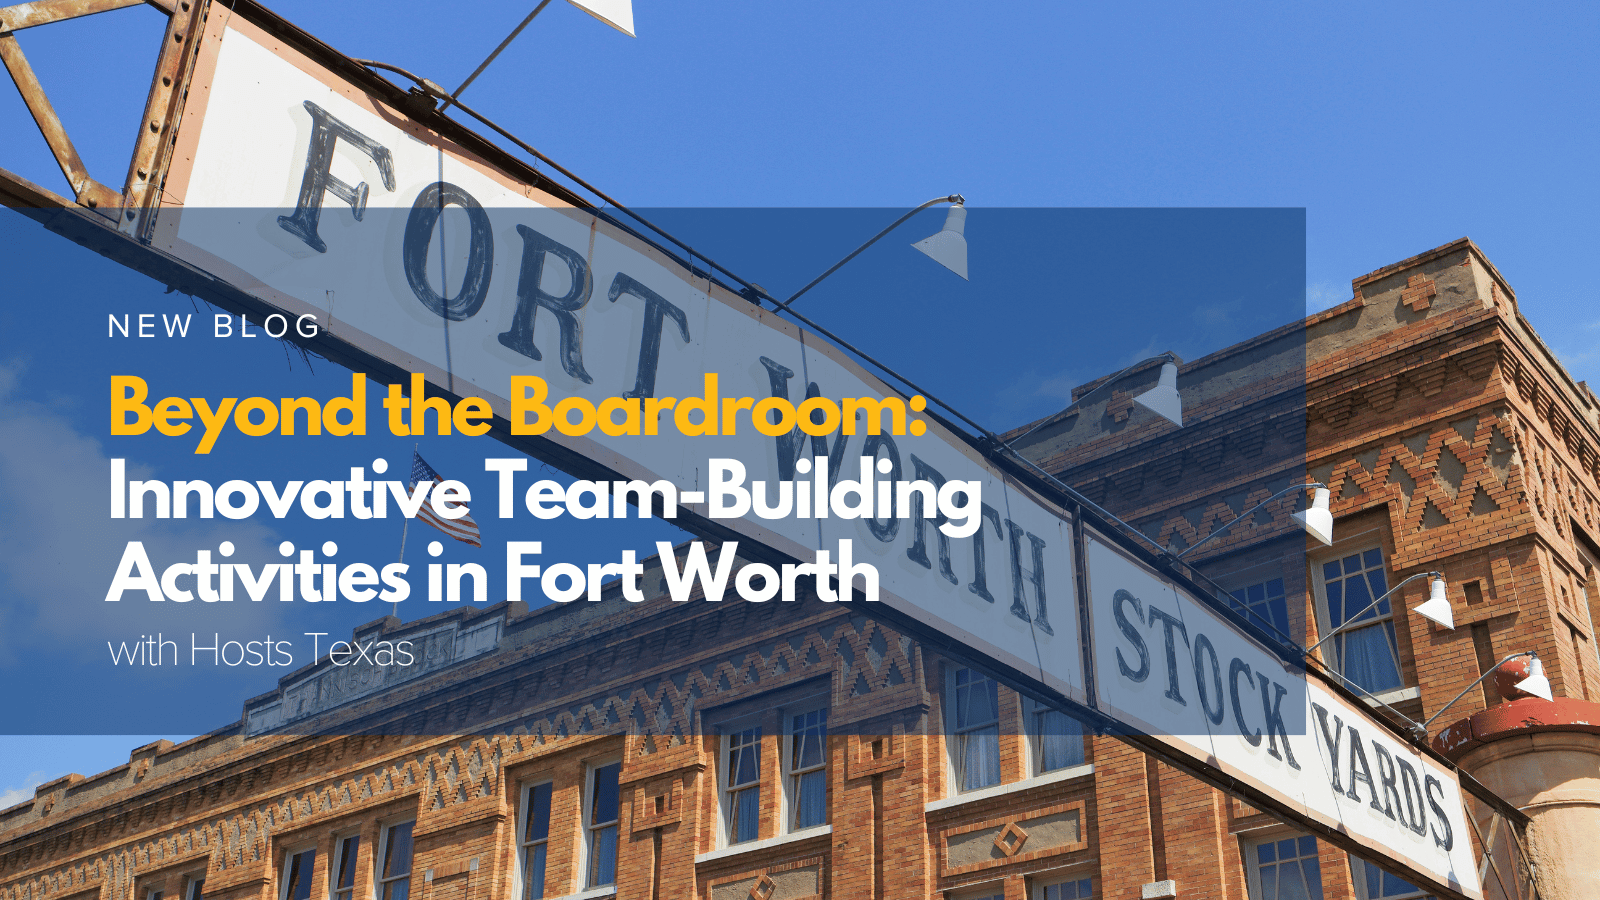 Beyond the Boardroom: Fort Worth Team-Building Activities